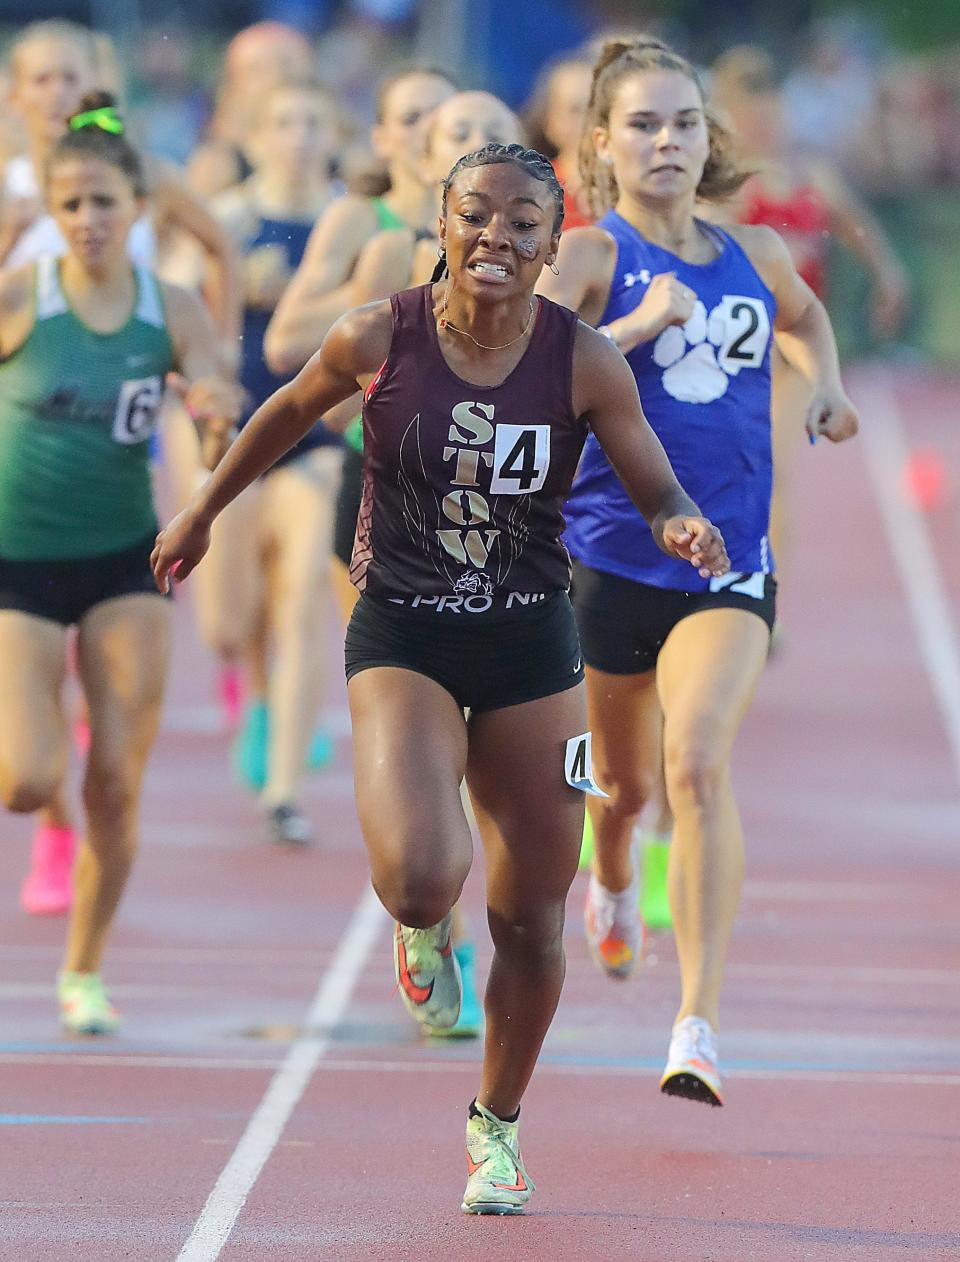 Stow's Jayla Atkinson finished first in the 800 meter run at the OHSAA Division I state track & field championships on Saturday, June 3, 2023 in Columbus, Ohio, at Jesse Owens Memorial Stadium.